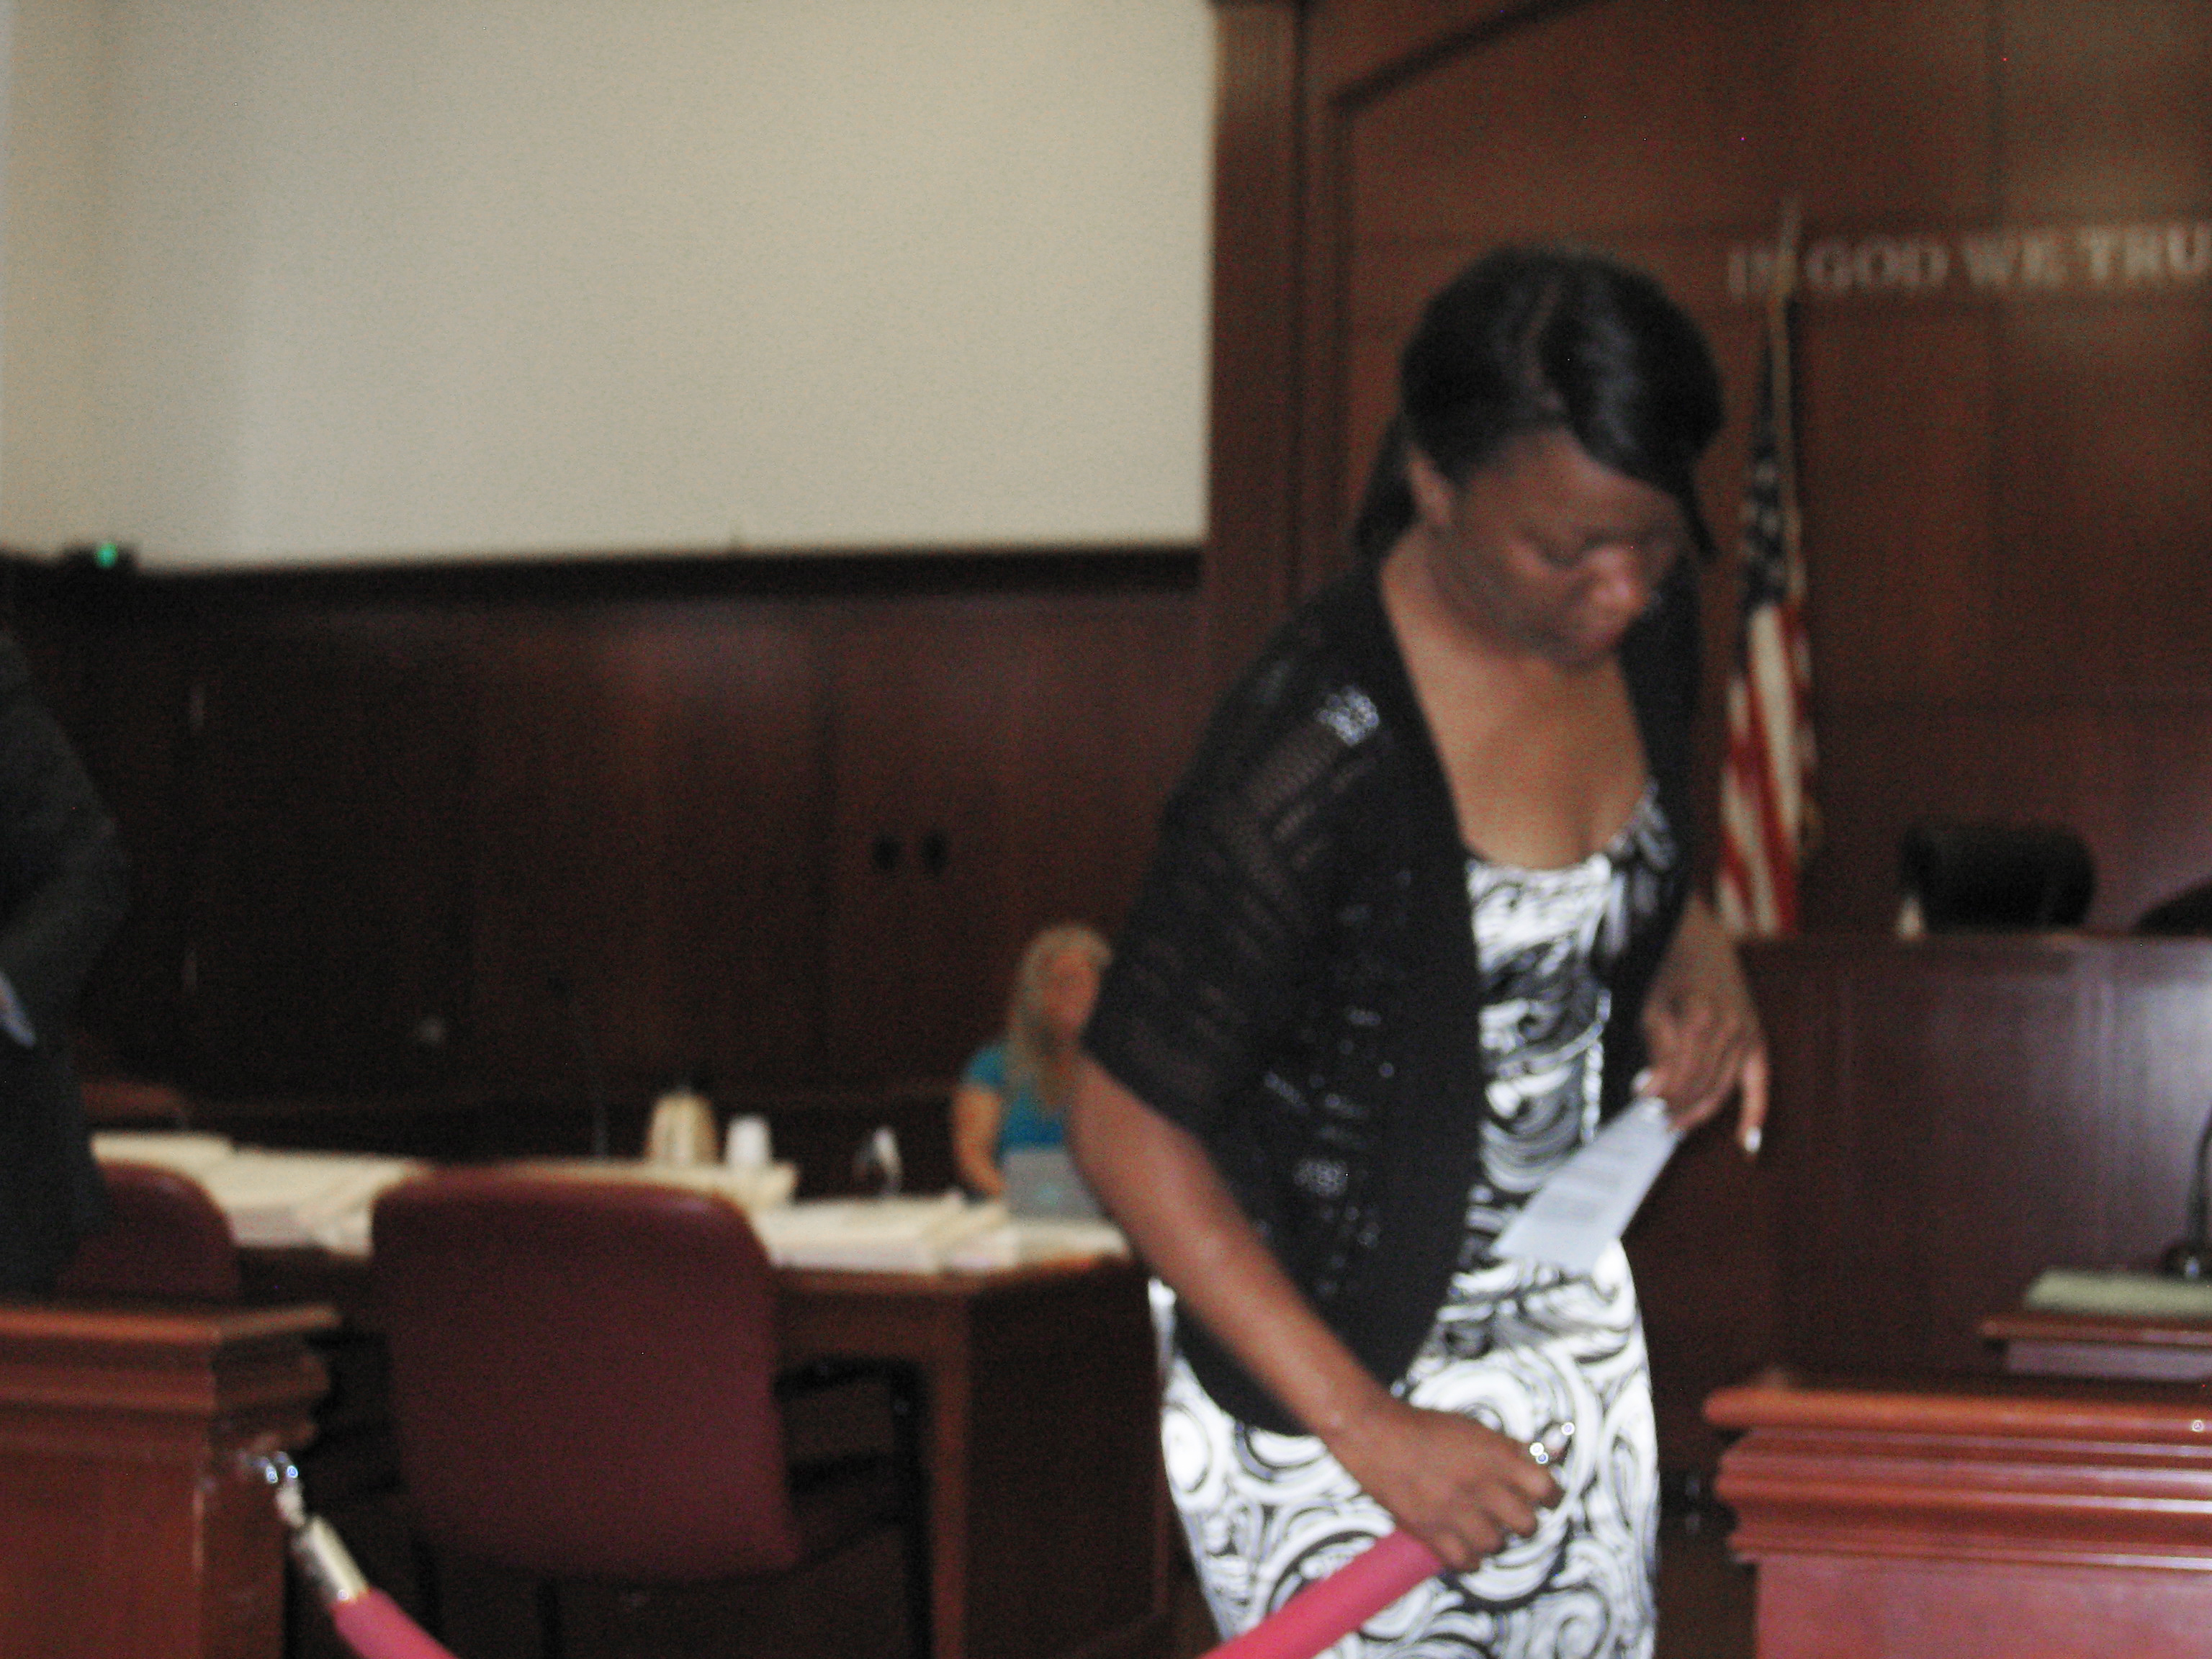 Tiffany Murdaugh pleaded not guilty in criminal court on Wednesday. Downtown Express photo by Dusica Sue Malesevic